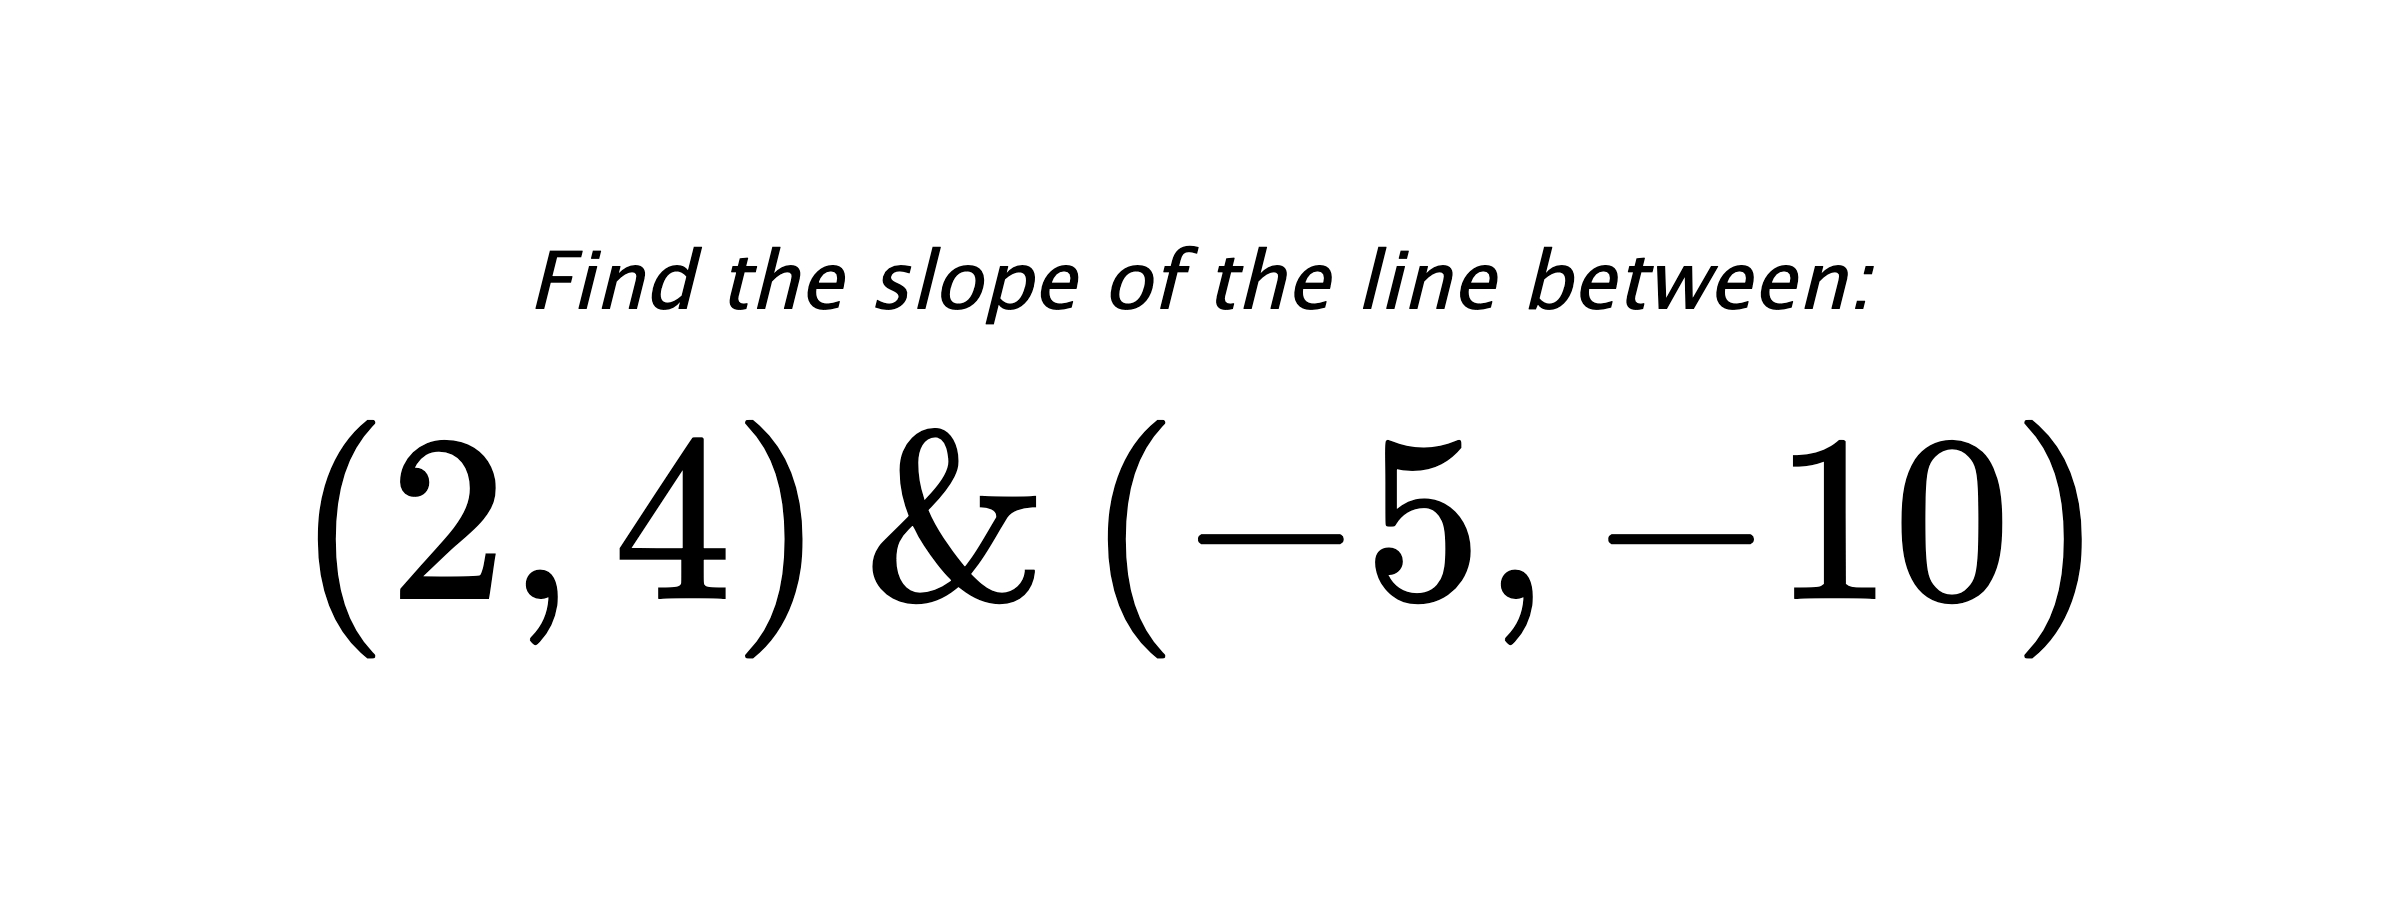 Find the slope of the line between: $ (2,4) \hspace{0.5cm} \text{&} \hspace{0.5cm} (-5,-10) $